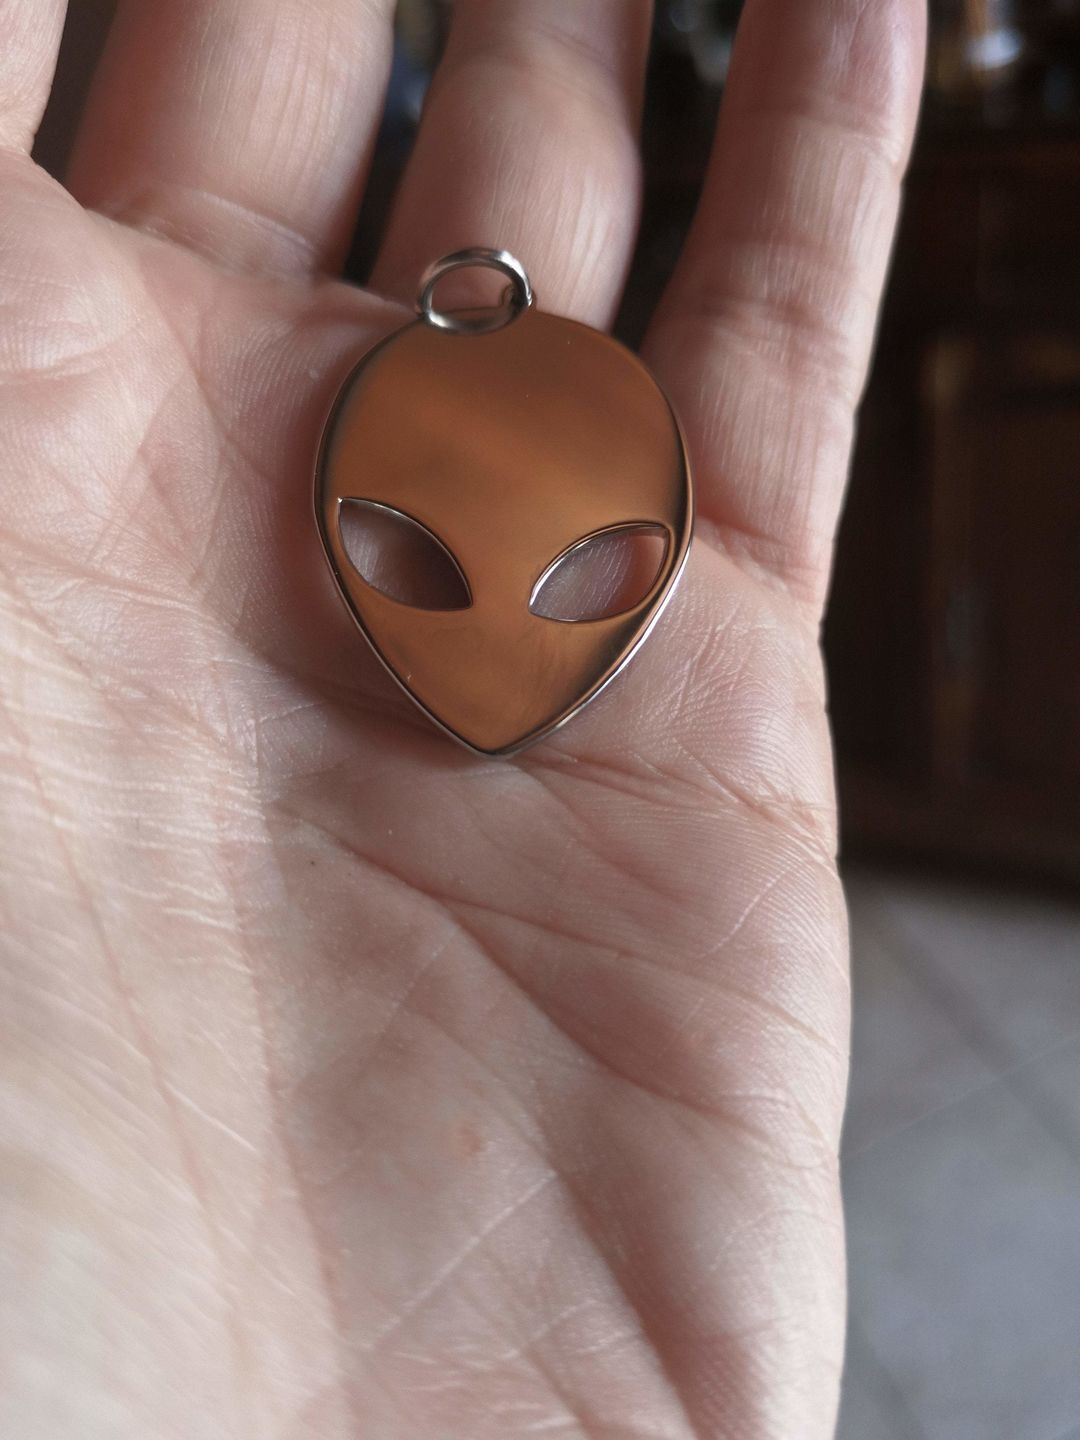 Tom H. review of UFO Symbol Necklace
